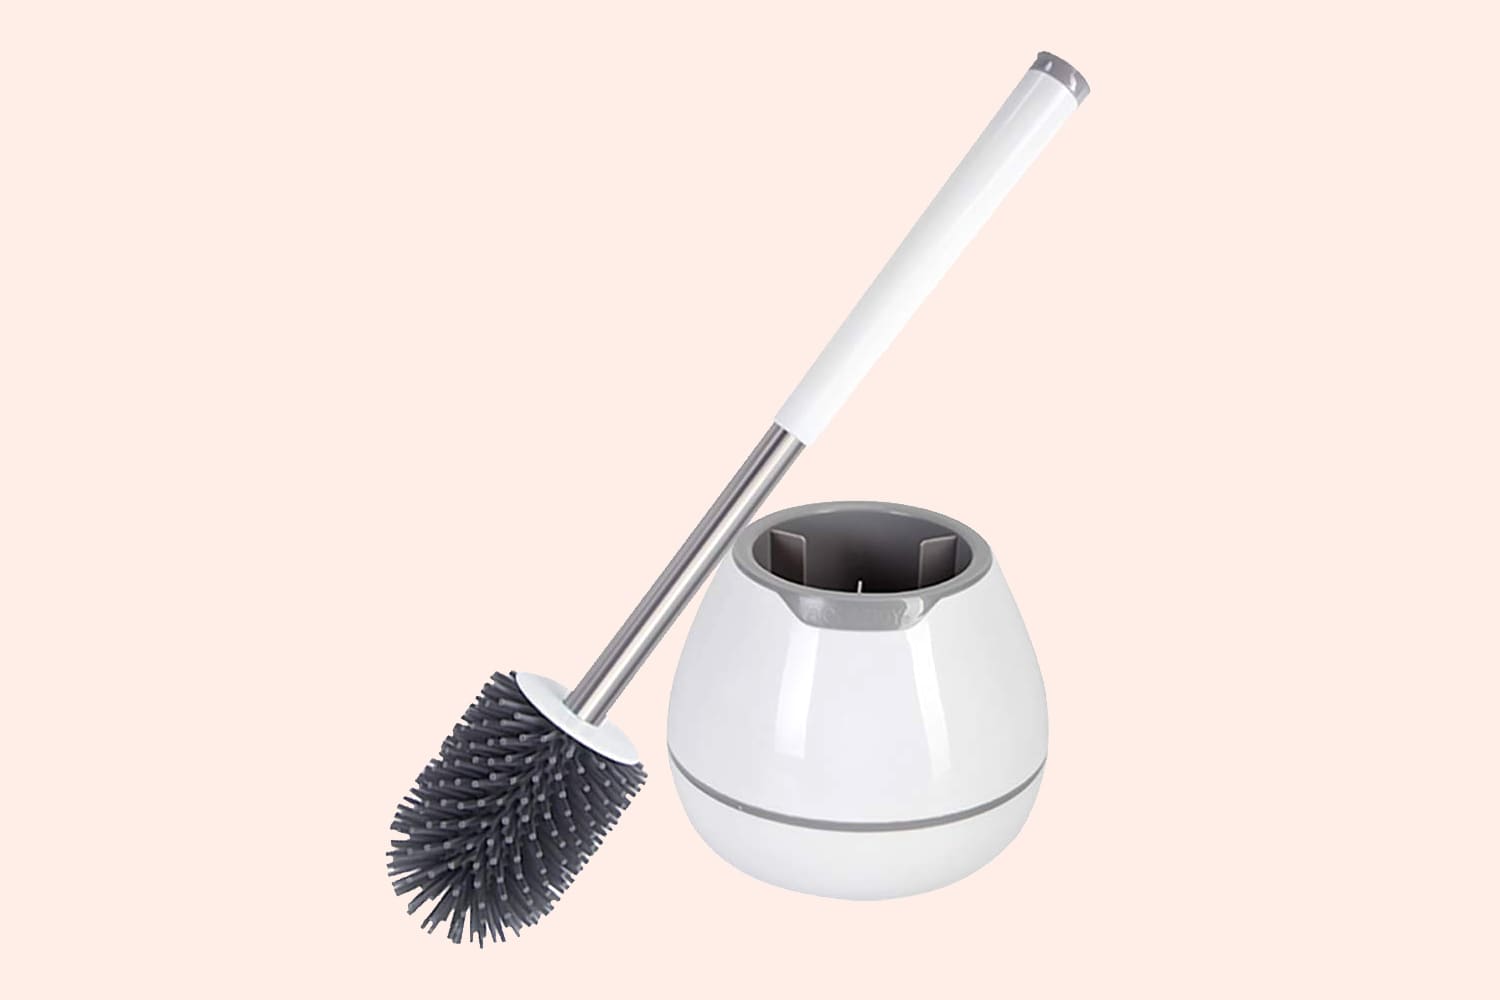 Do Silicone Toilet Brushes Work? Are They Hygienic?